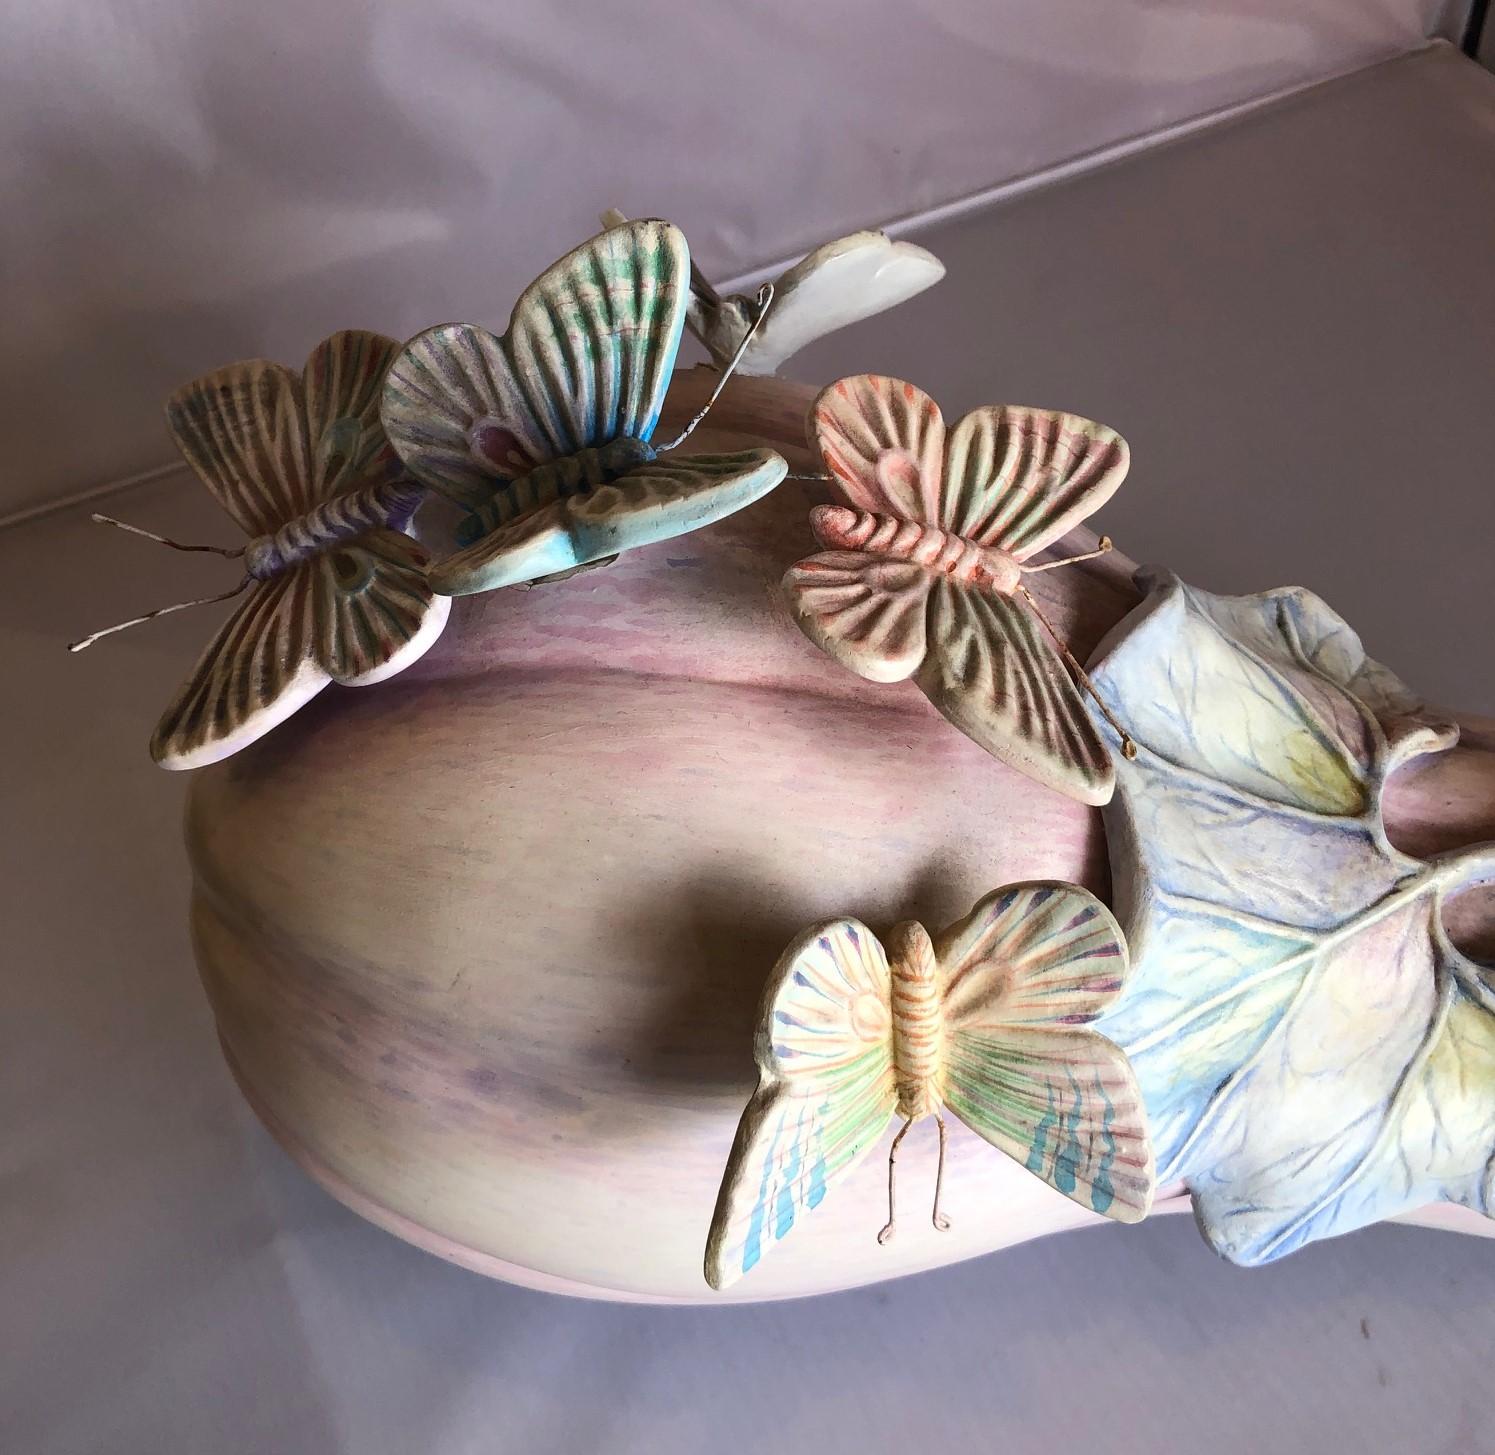 Whimsical Ceramic Butterflies on Squash Sculpture by Sergio Bustamante 2